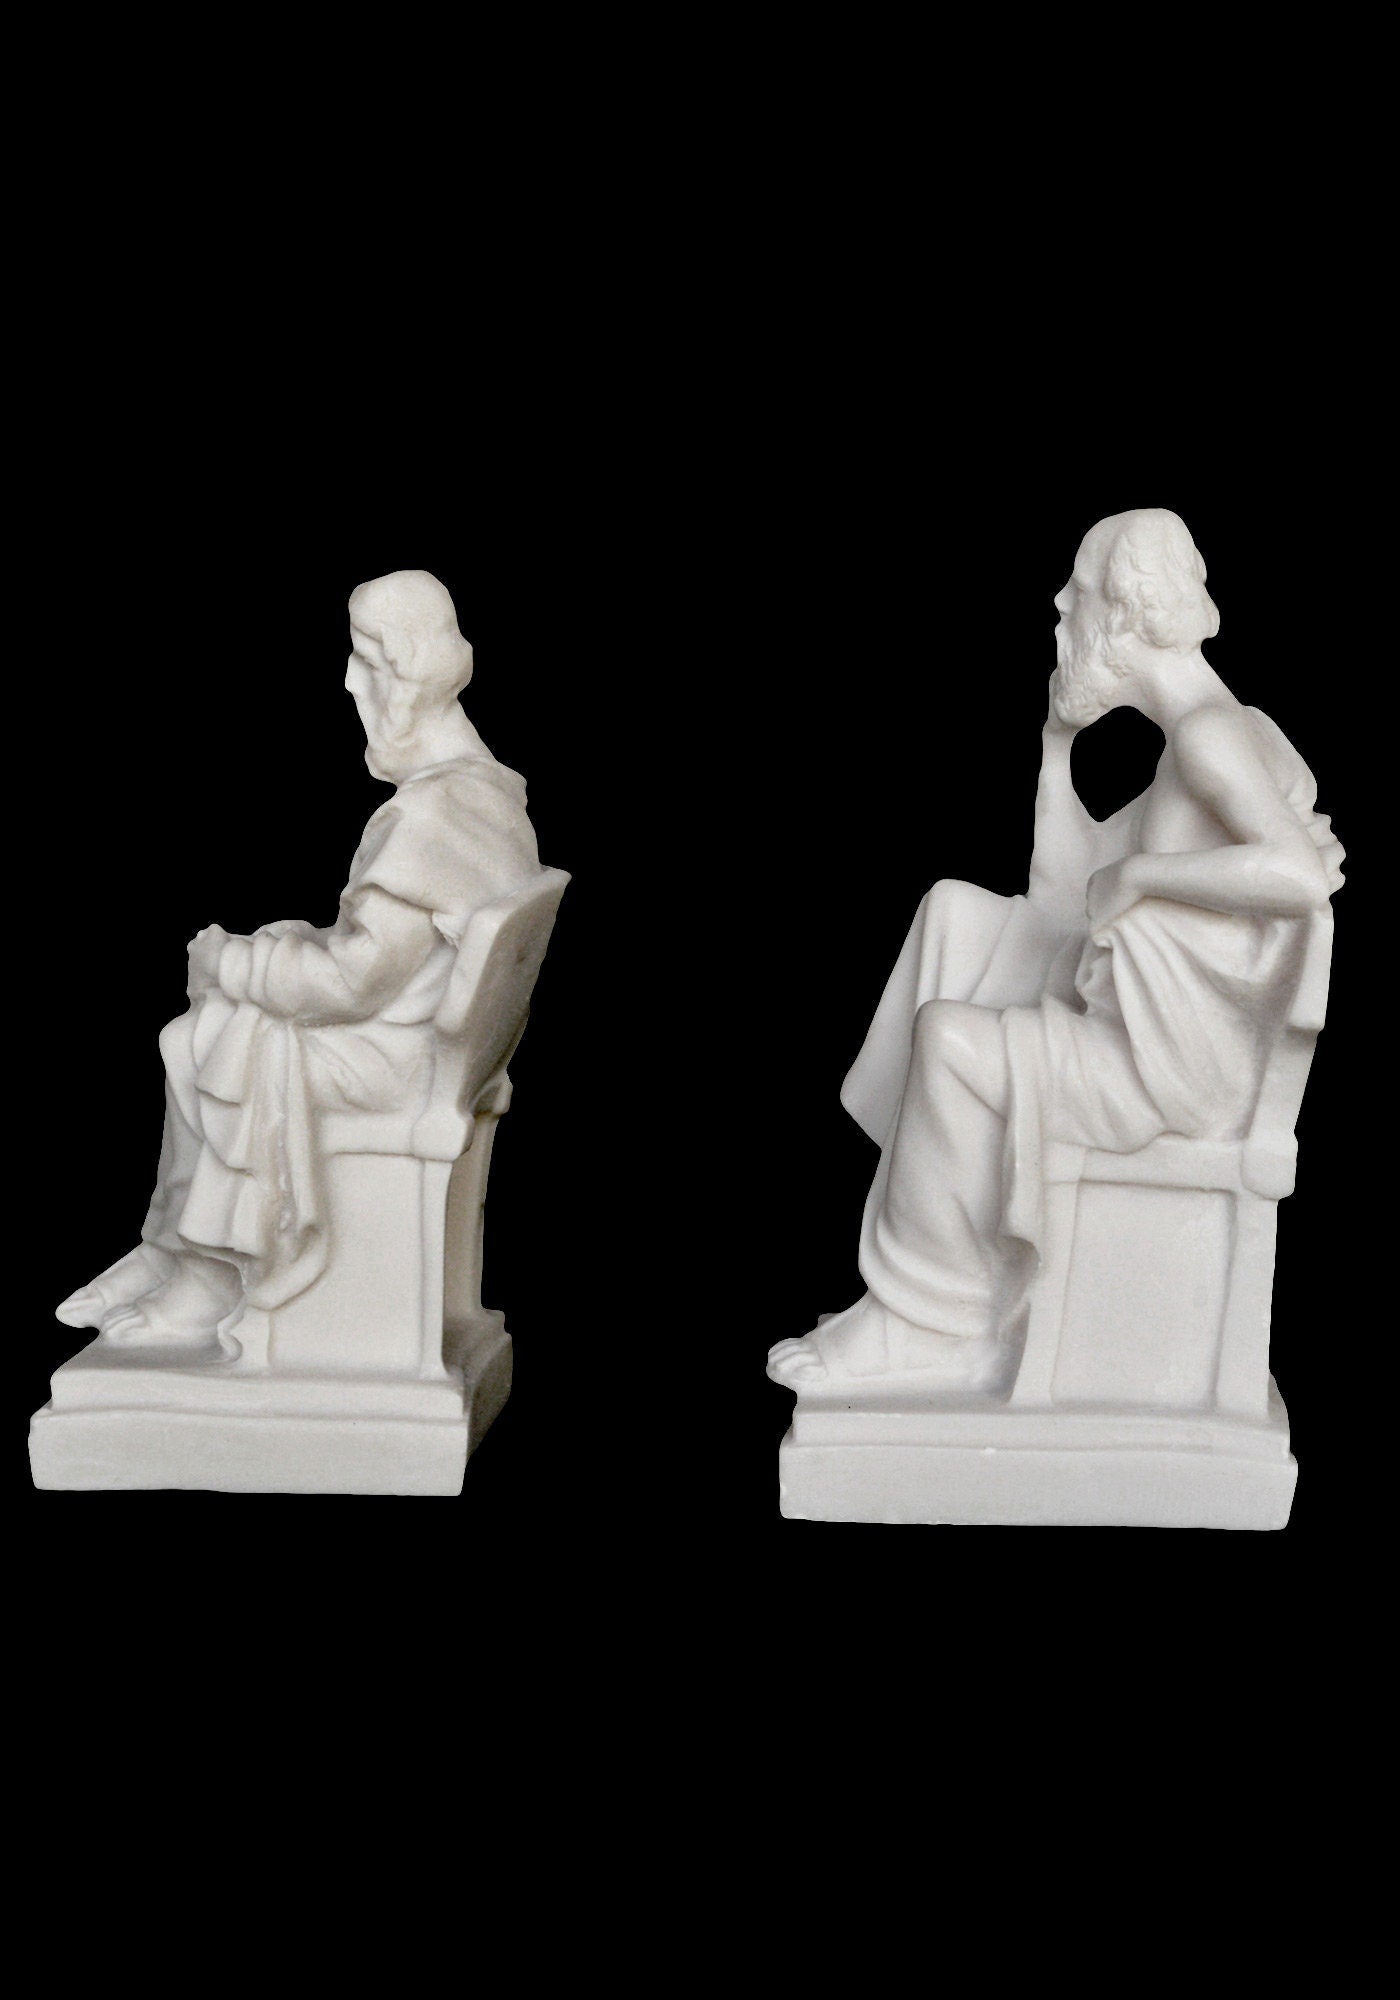 Socrates and Plato Set - Teacher and Student - Fathers of Western Philosophy - Alabaster Statues